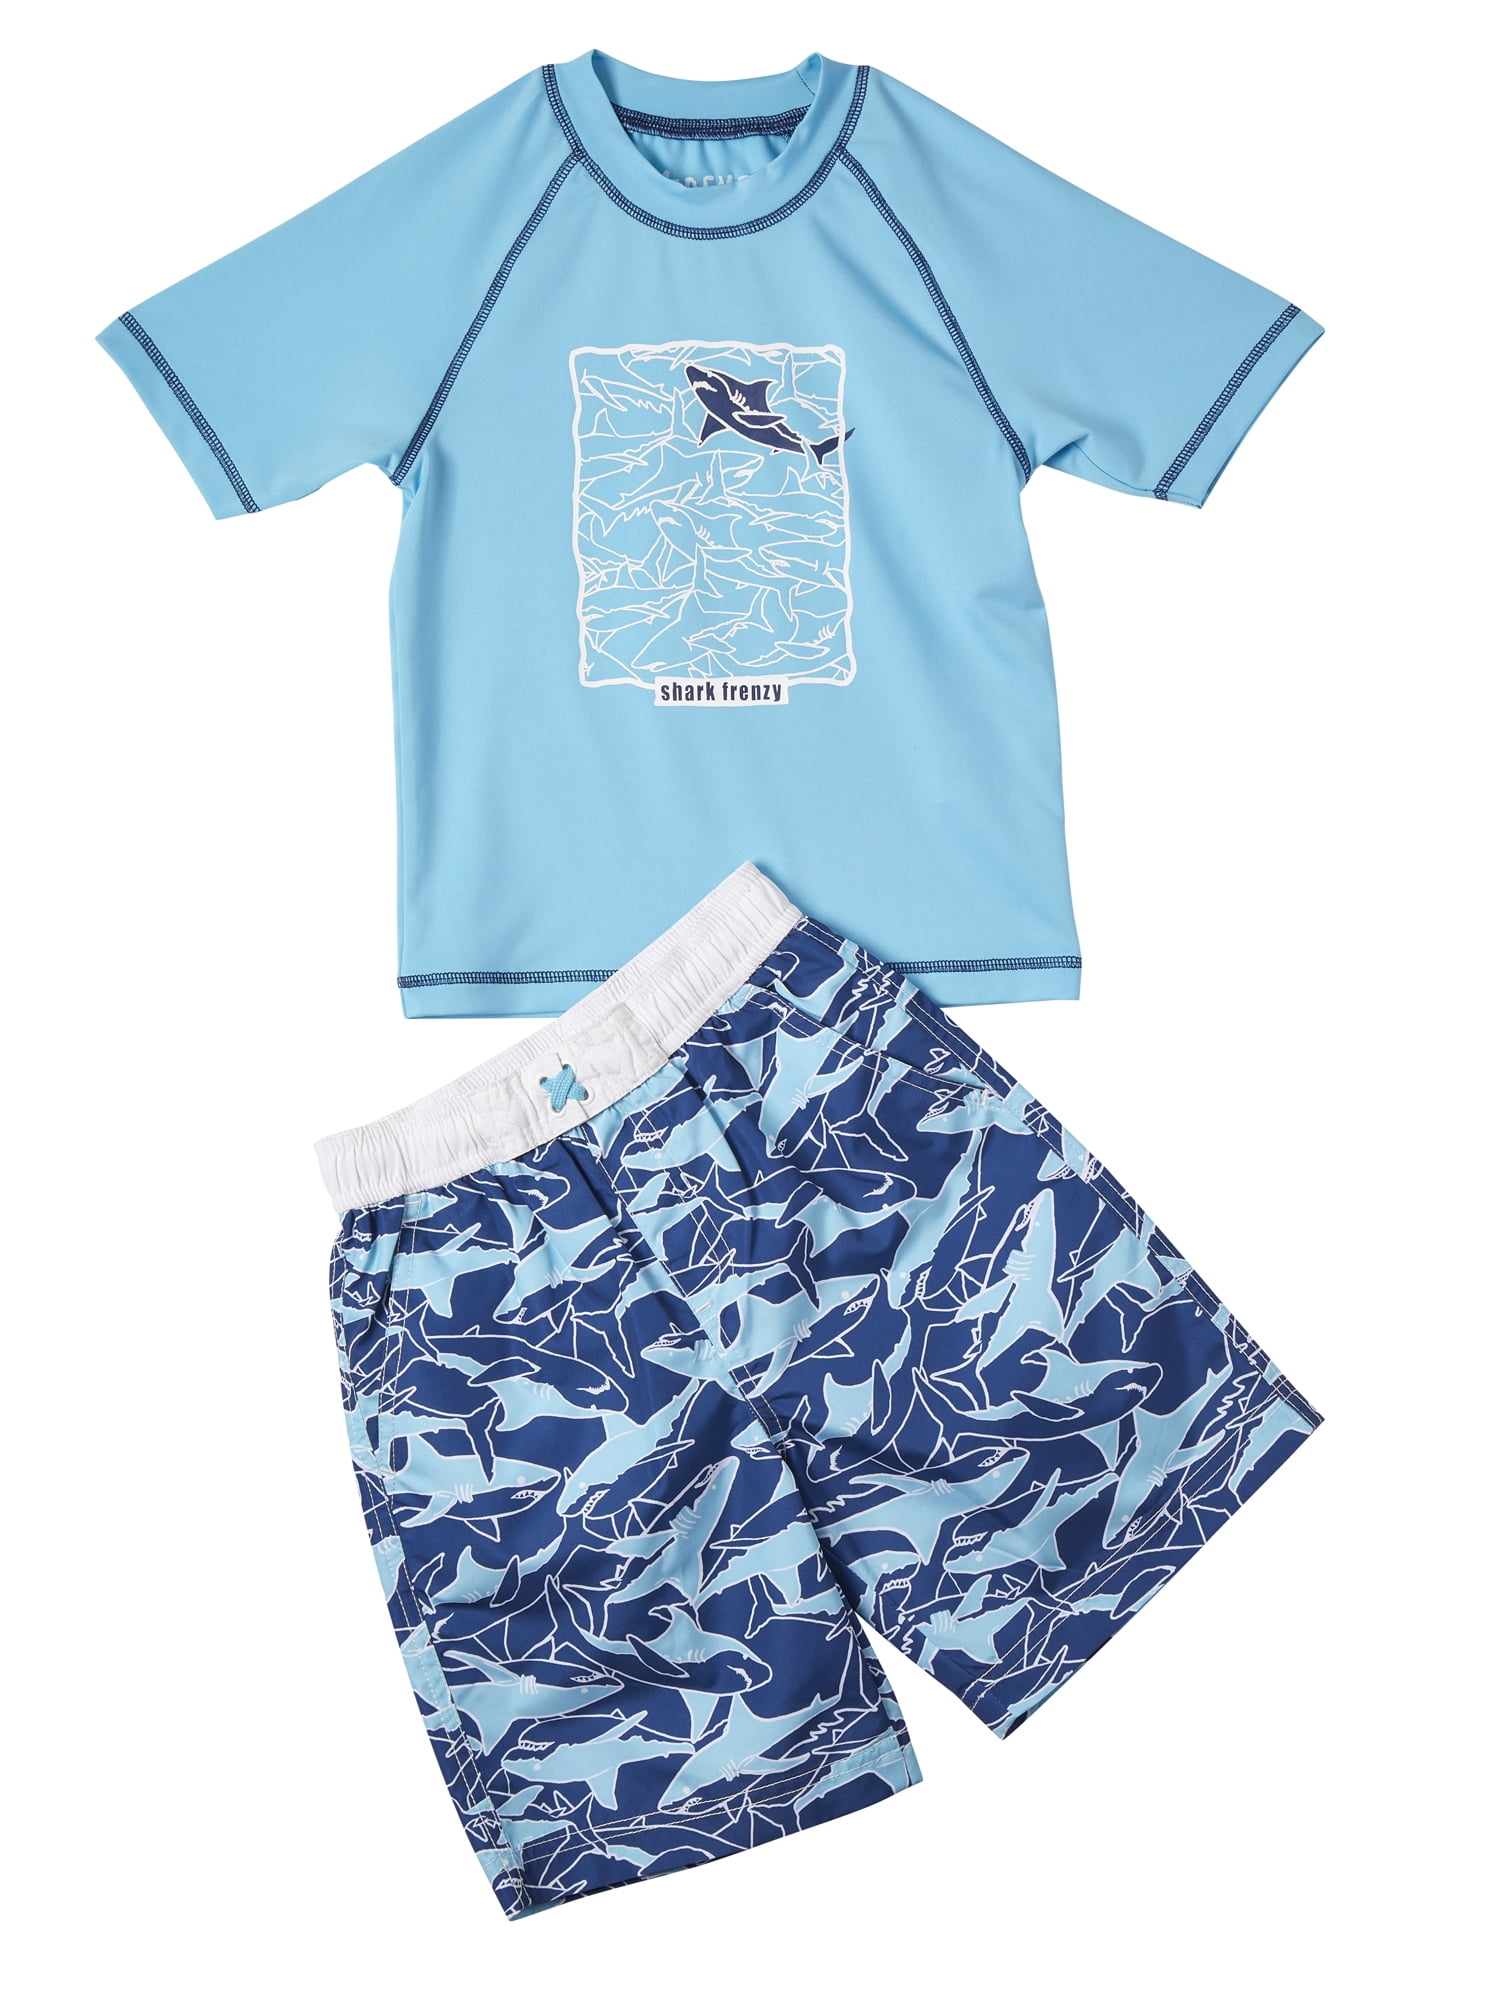 Wippette Blue Crab Swimsuit Set Swim Trunks & Hooded Coverup Size 2T Adorable! 